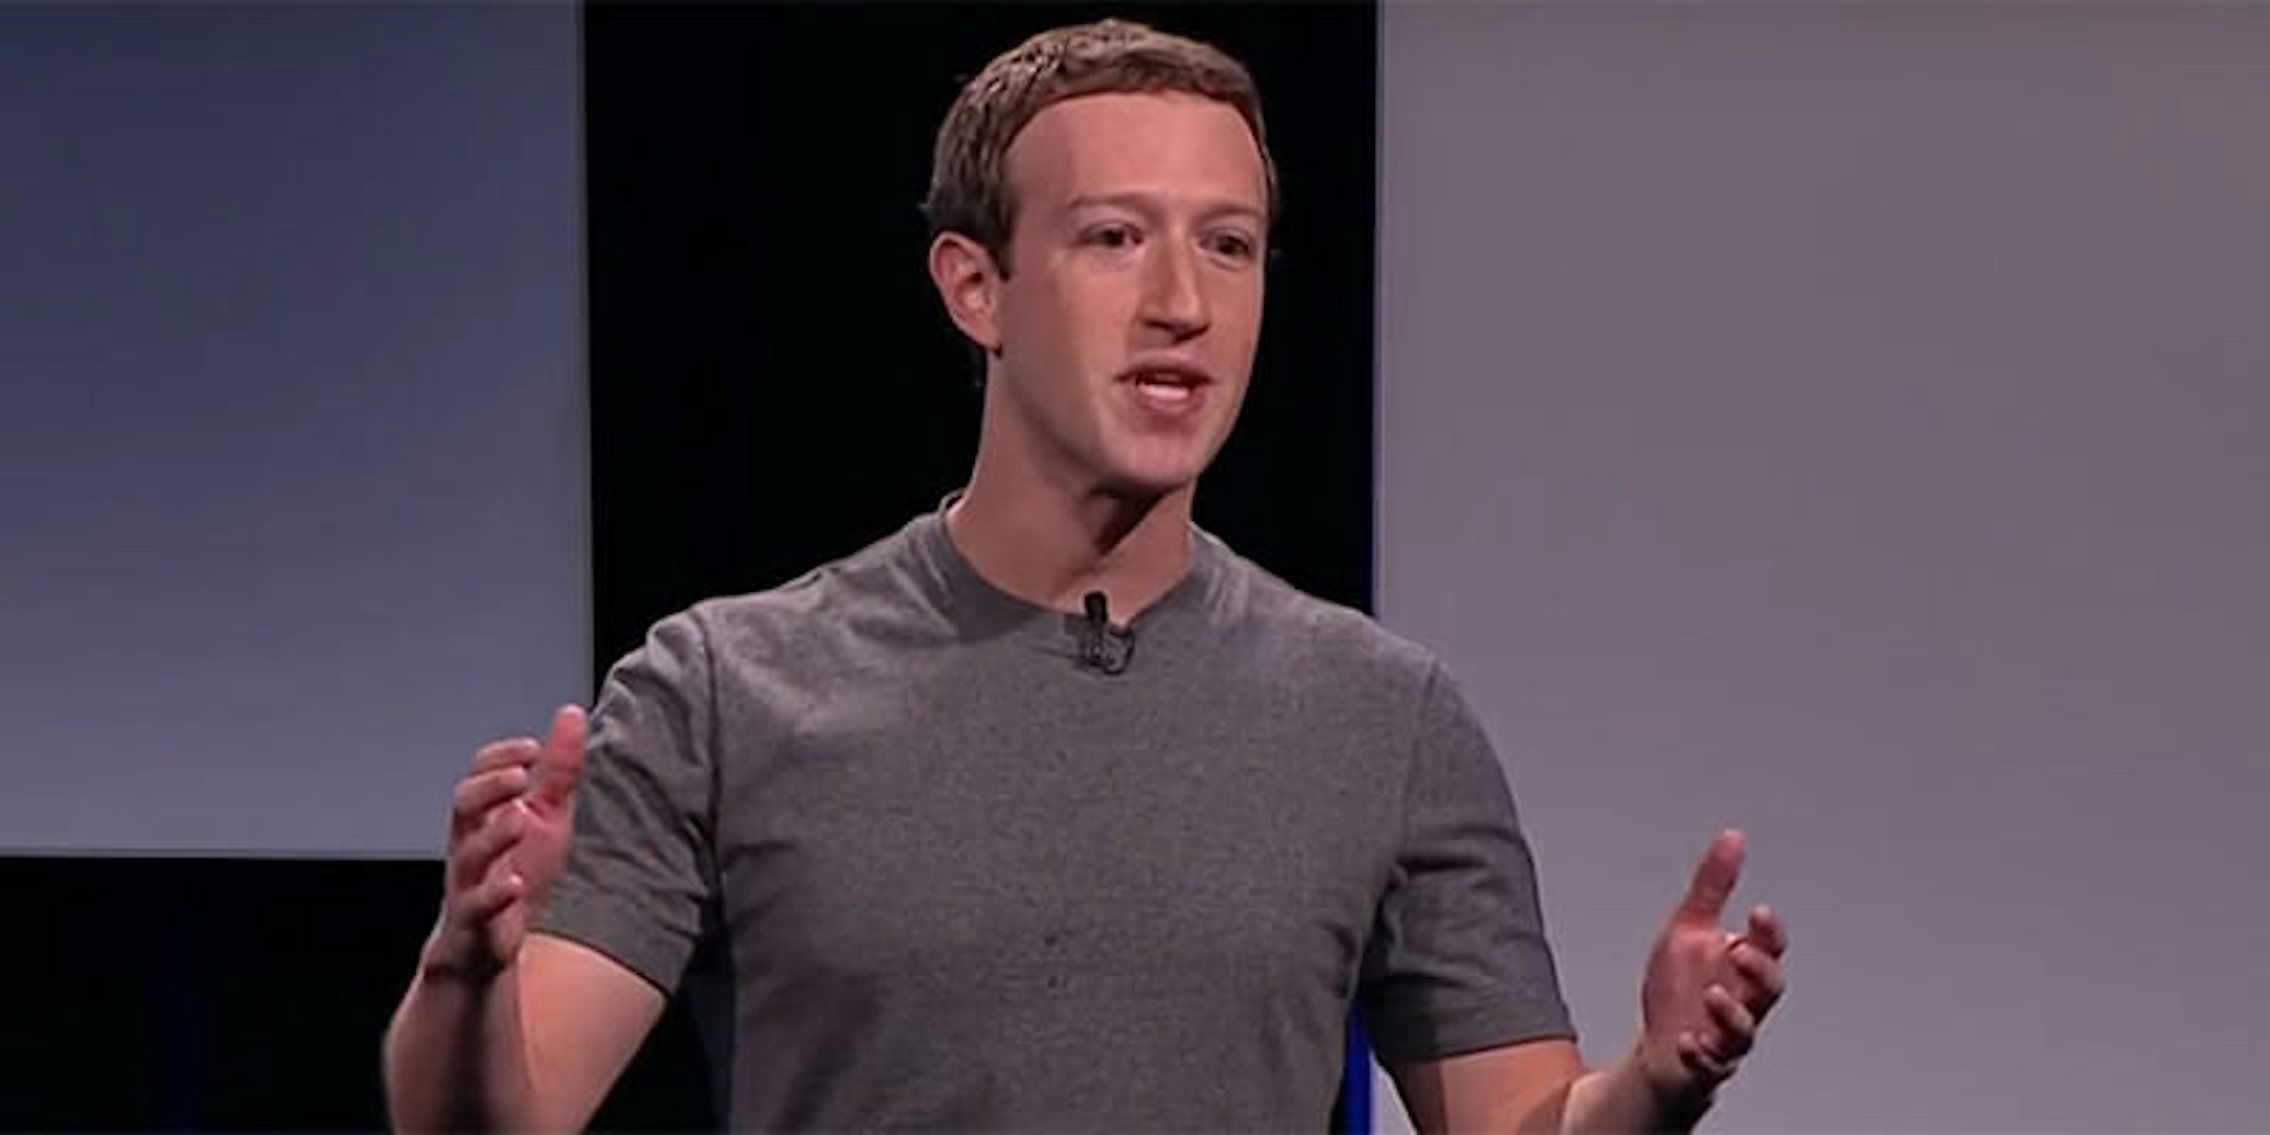 Mark Zuckerberg said on CNN he's 'sorry' about the Cambridge Analytica data scandal.